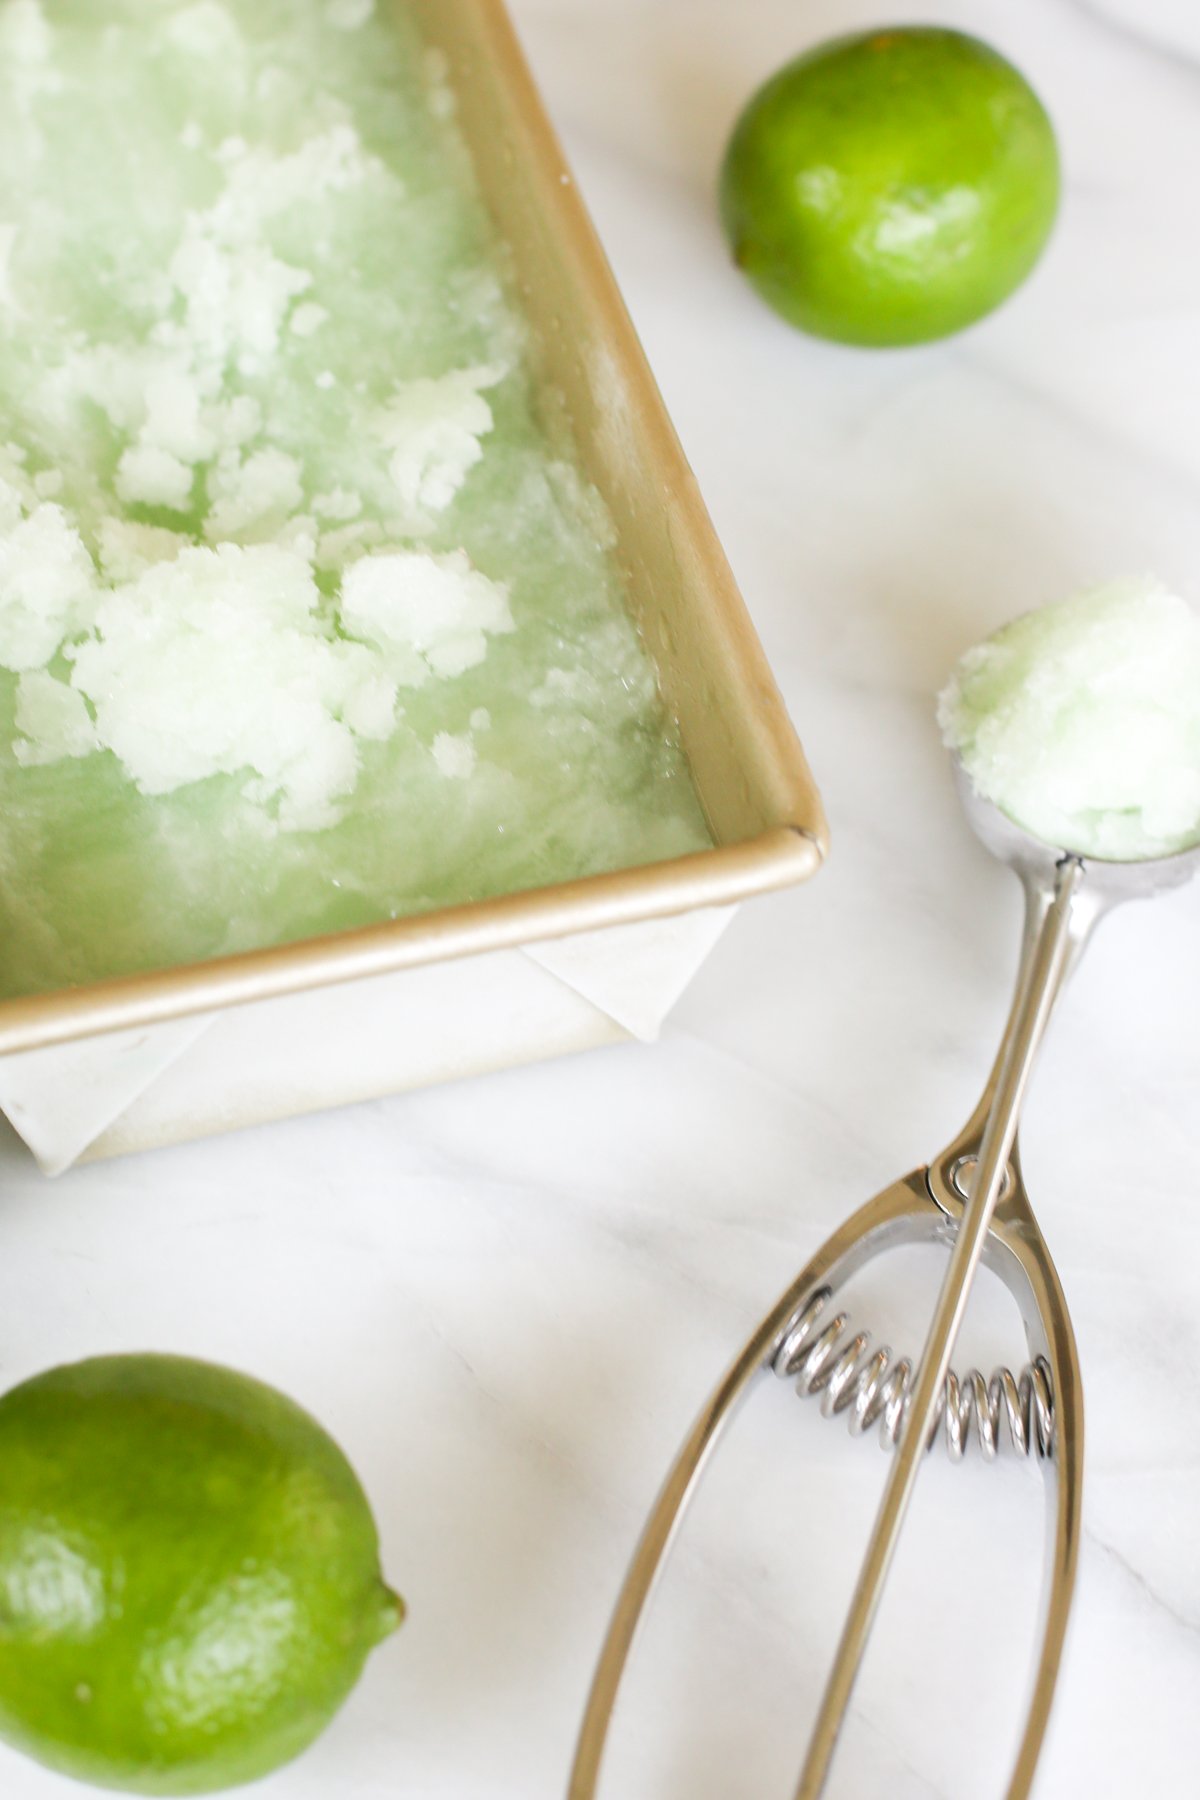 Homemade lime sorbet in a gold loaf pan. A lime and an ice cream scooper are nearby.